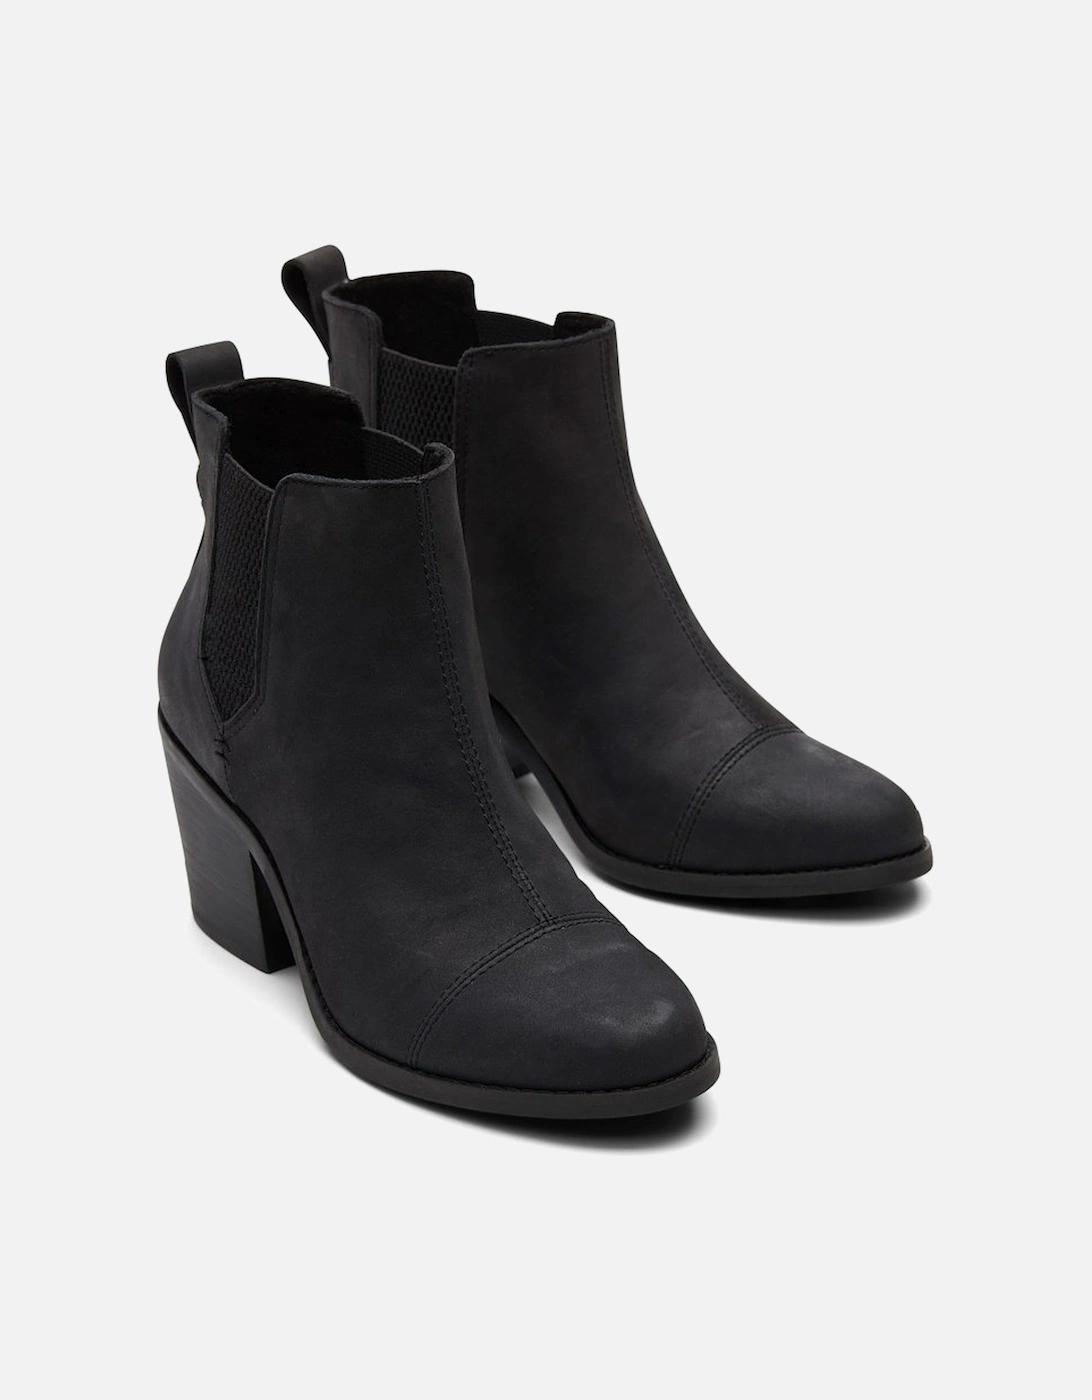 Everly Womens Chelsea Boots